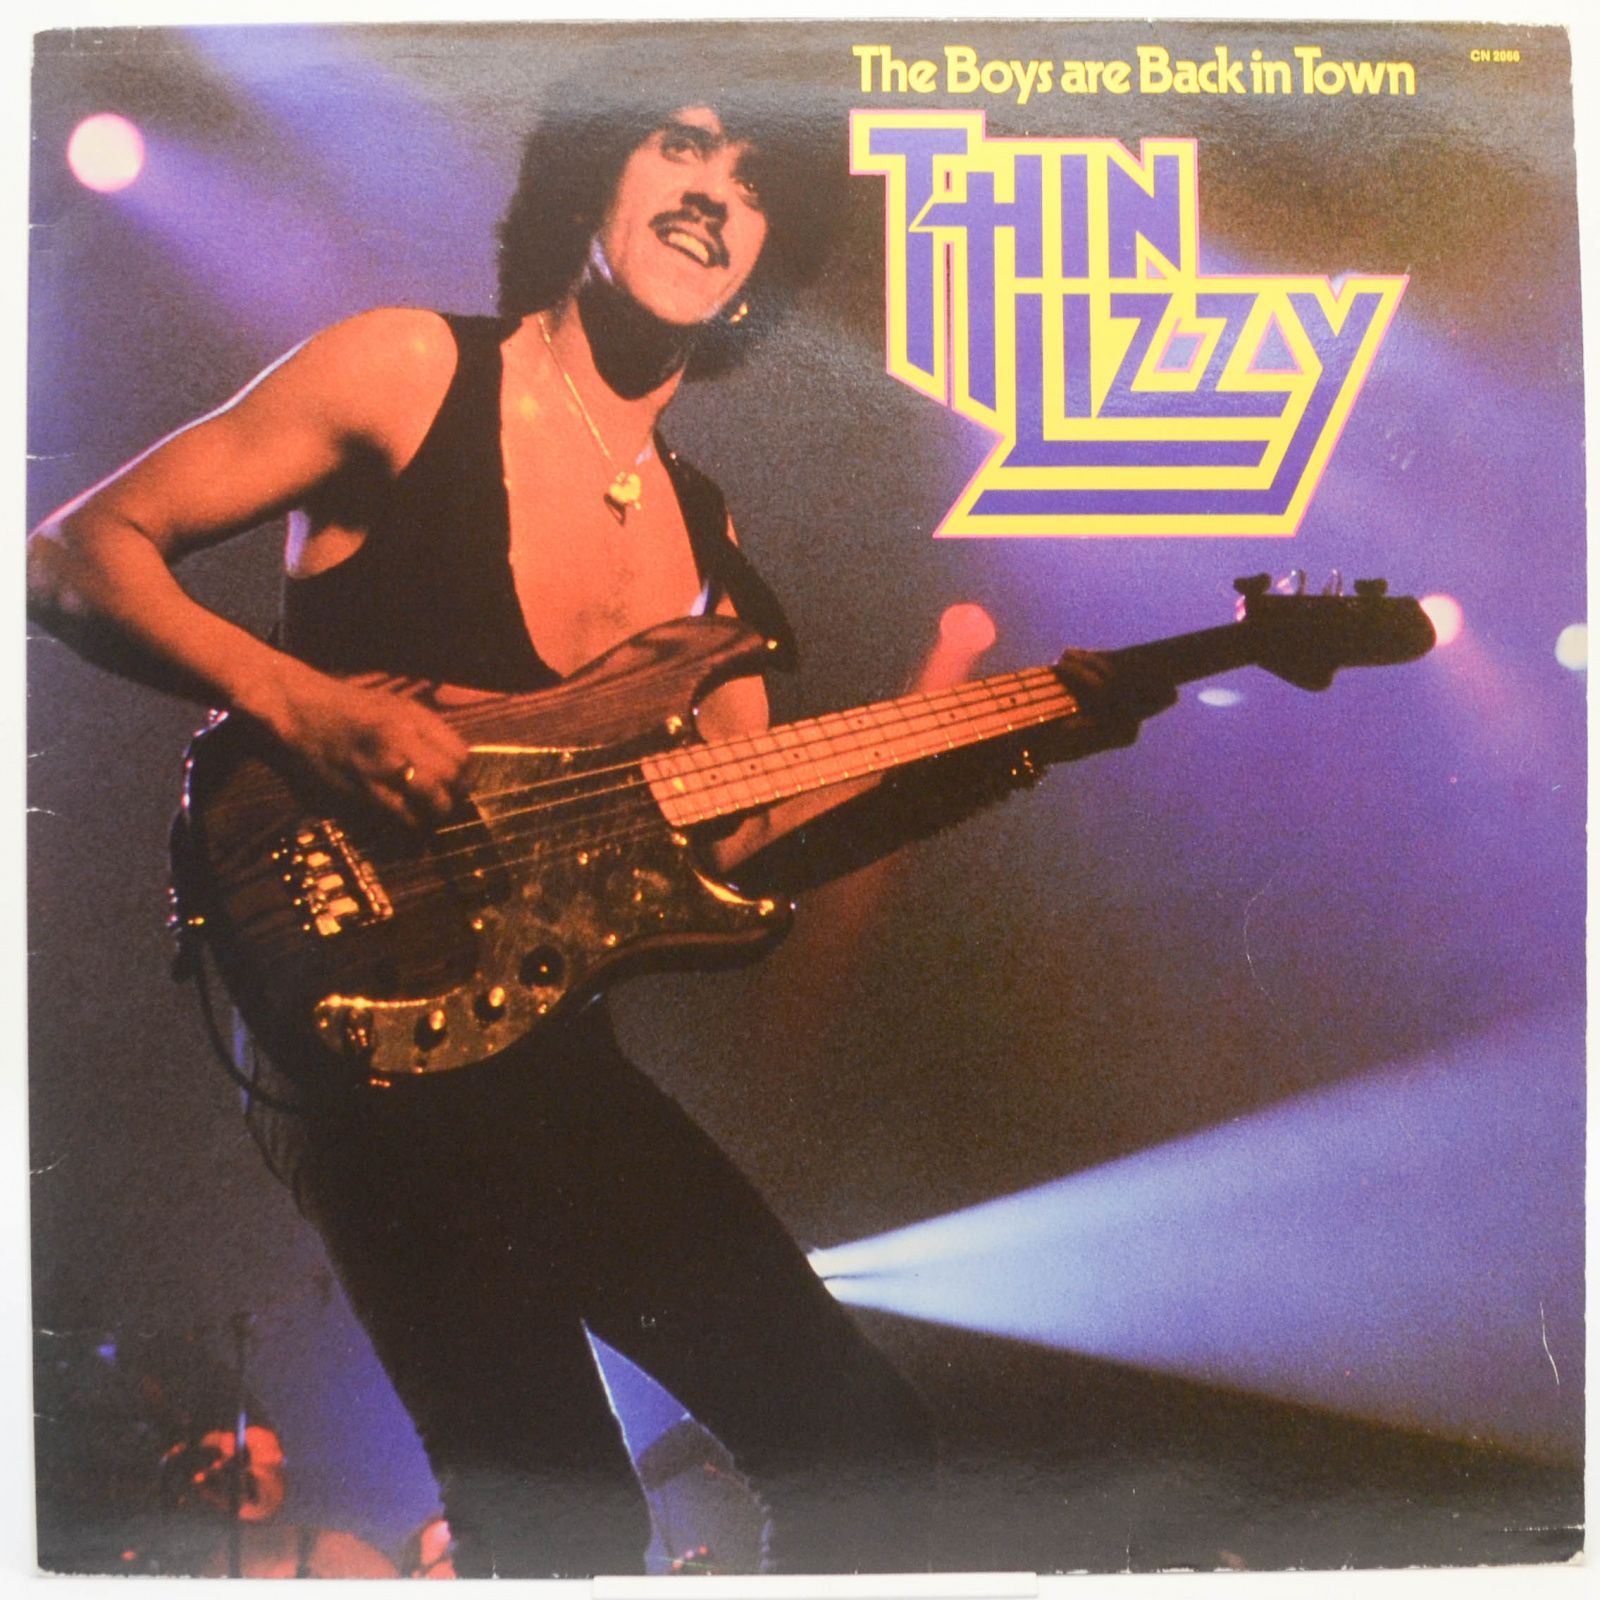 Thin Lizzy — The Boys Are Back In Town (UK), 1983